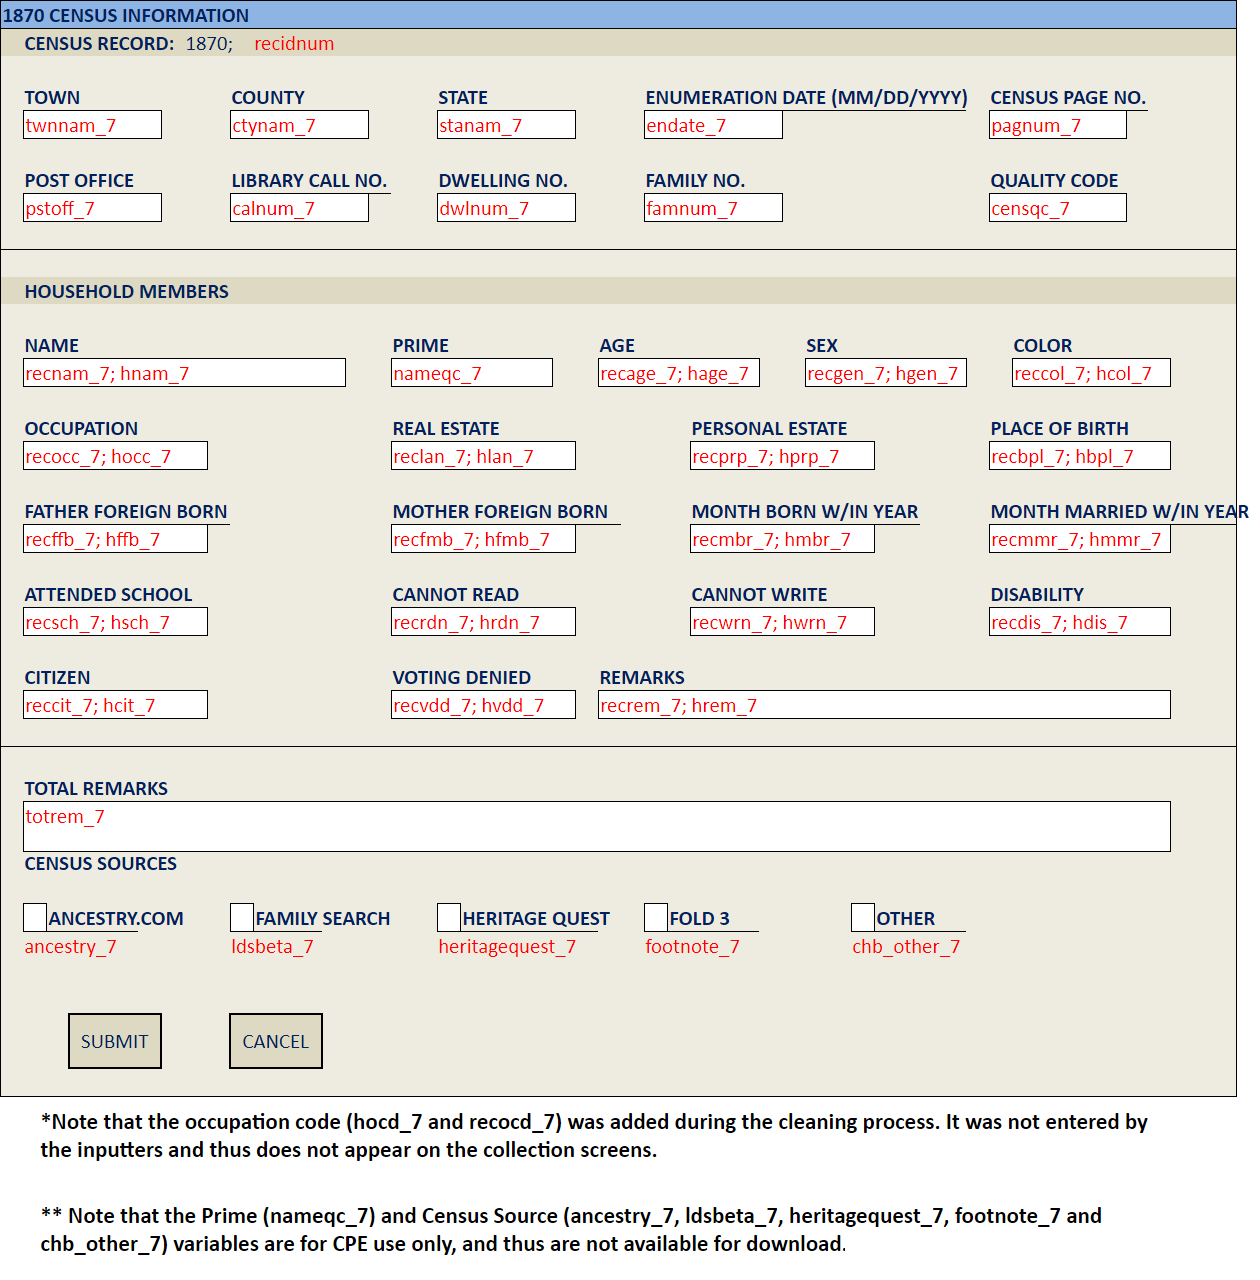 Image of the Union Army 1870 Census data entry screen